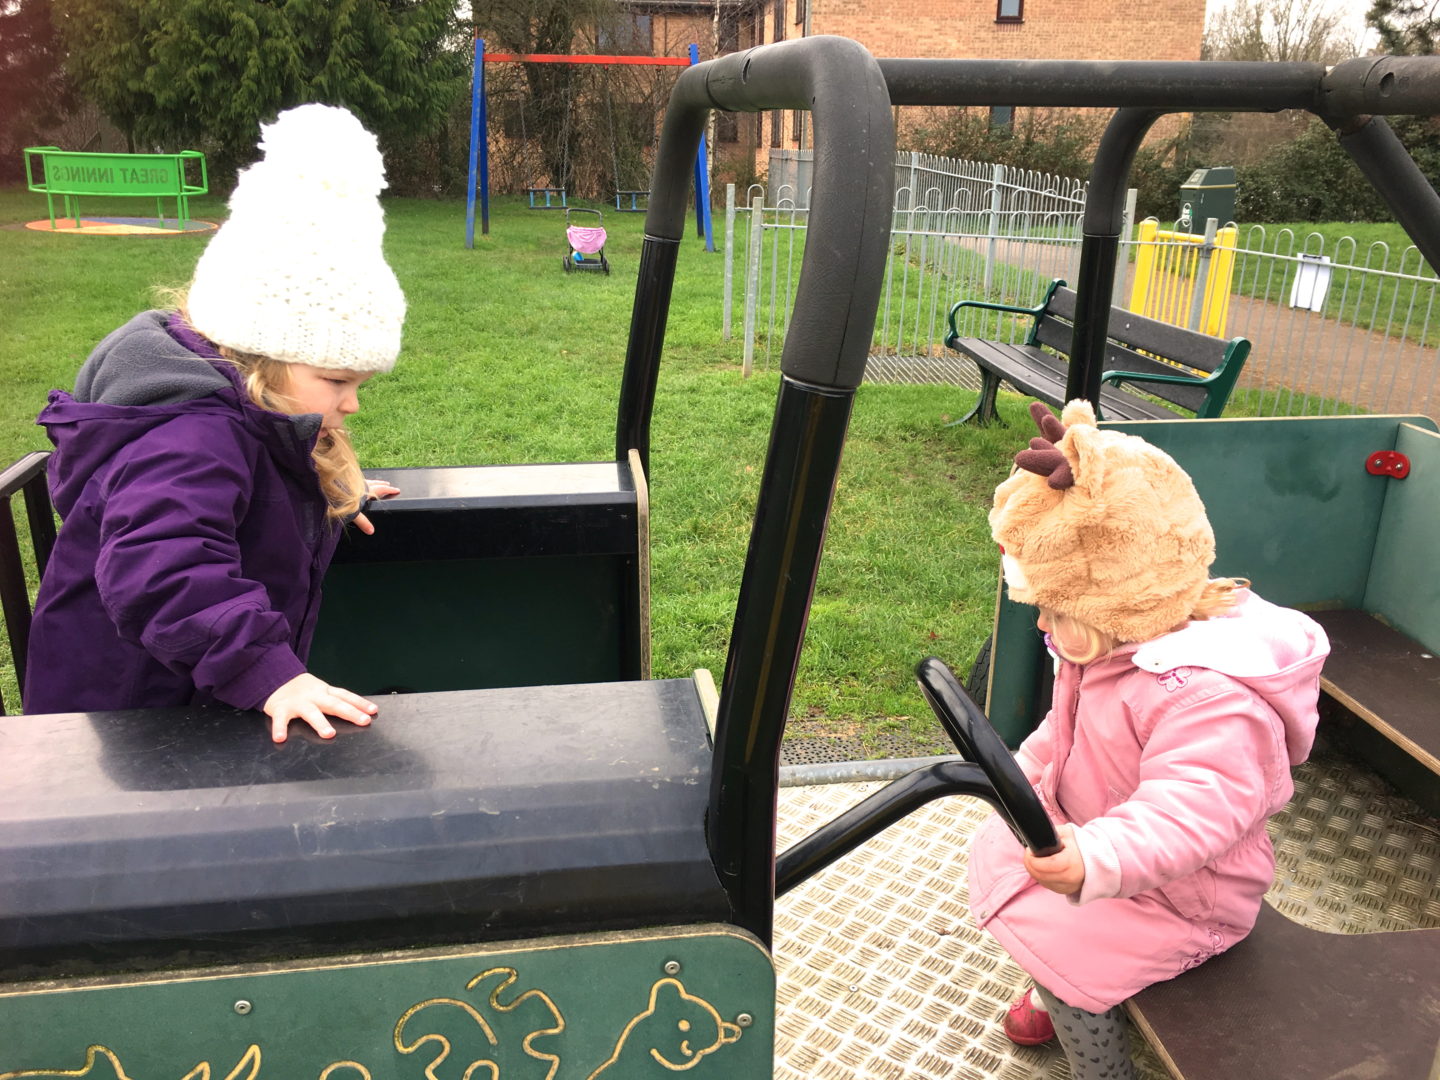 Two toddler sisters playing on a climbing frame car in a playground